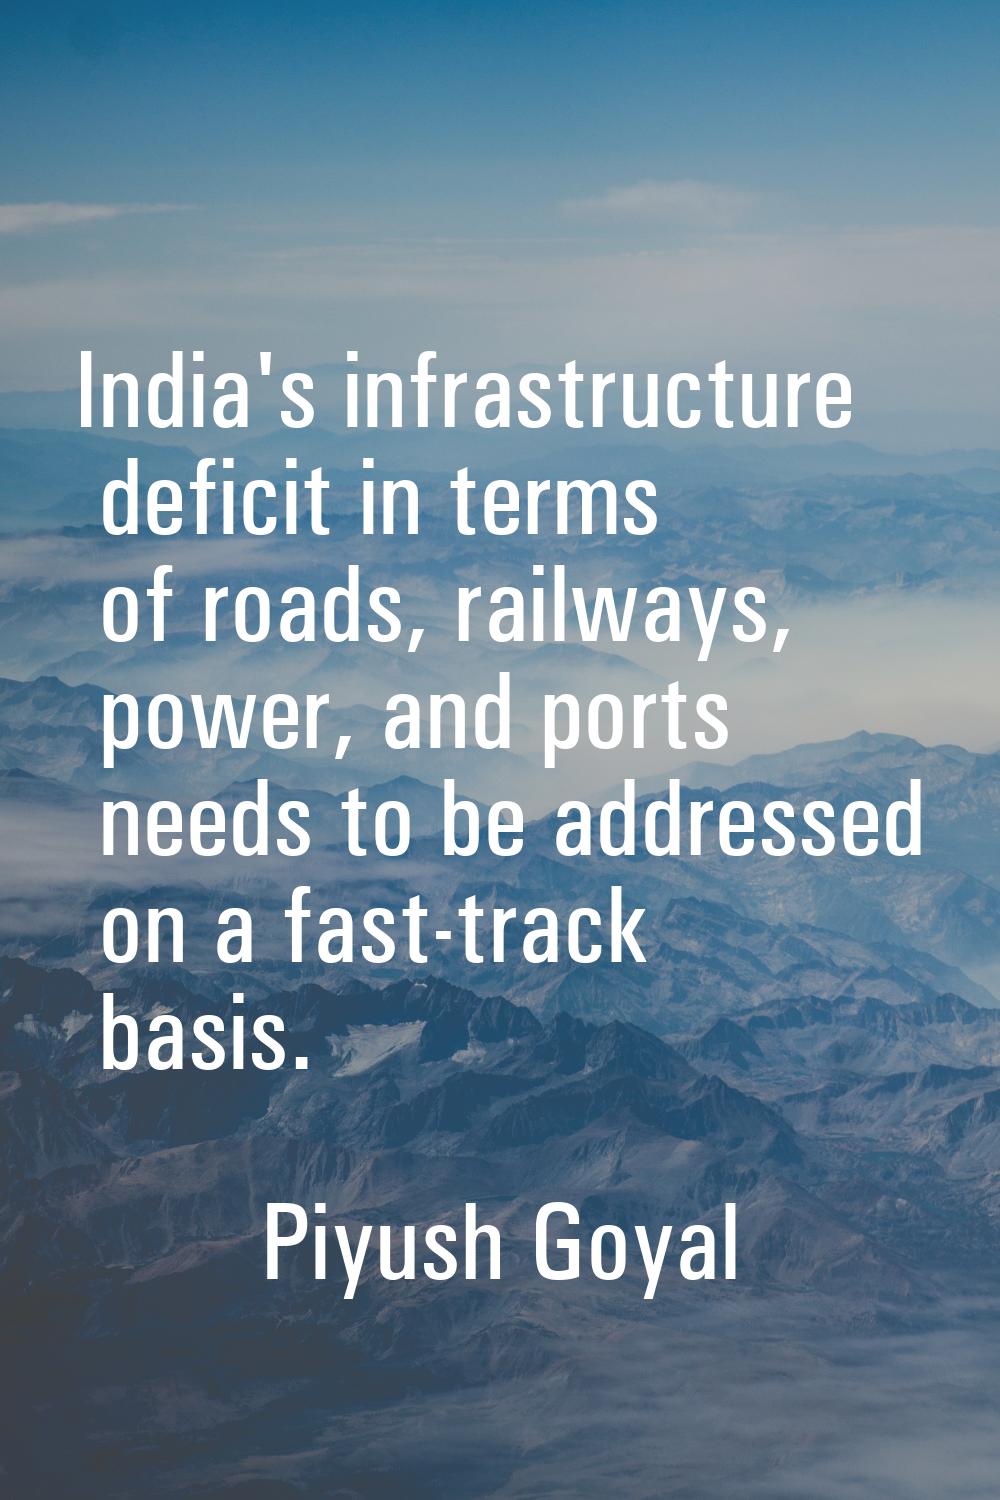 India's infrastructure deficit in terms of roads, railways, power, and ports needs to be addressed 